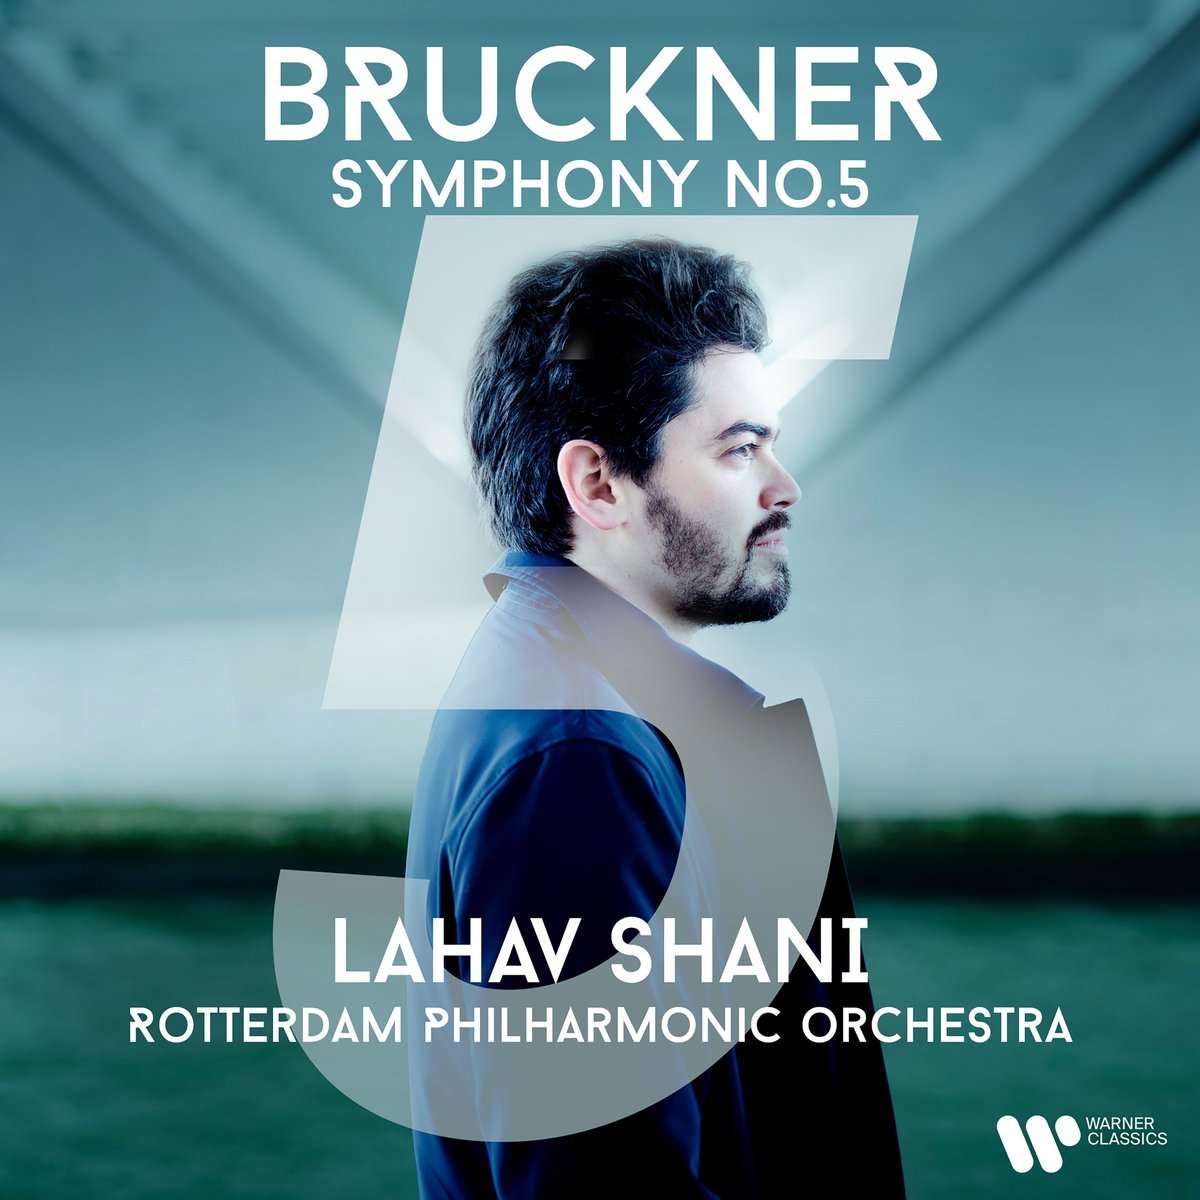 In the third movement of his fifth symphony, Bruckner contrasts urgent exuberance with pastoral lyricism in a captivating score brought alive in this recording by the @rdamphil conducted by Lahav Shani. 🎧 w.lnk.to/bru5TW